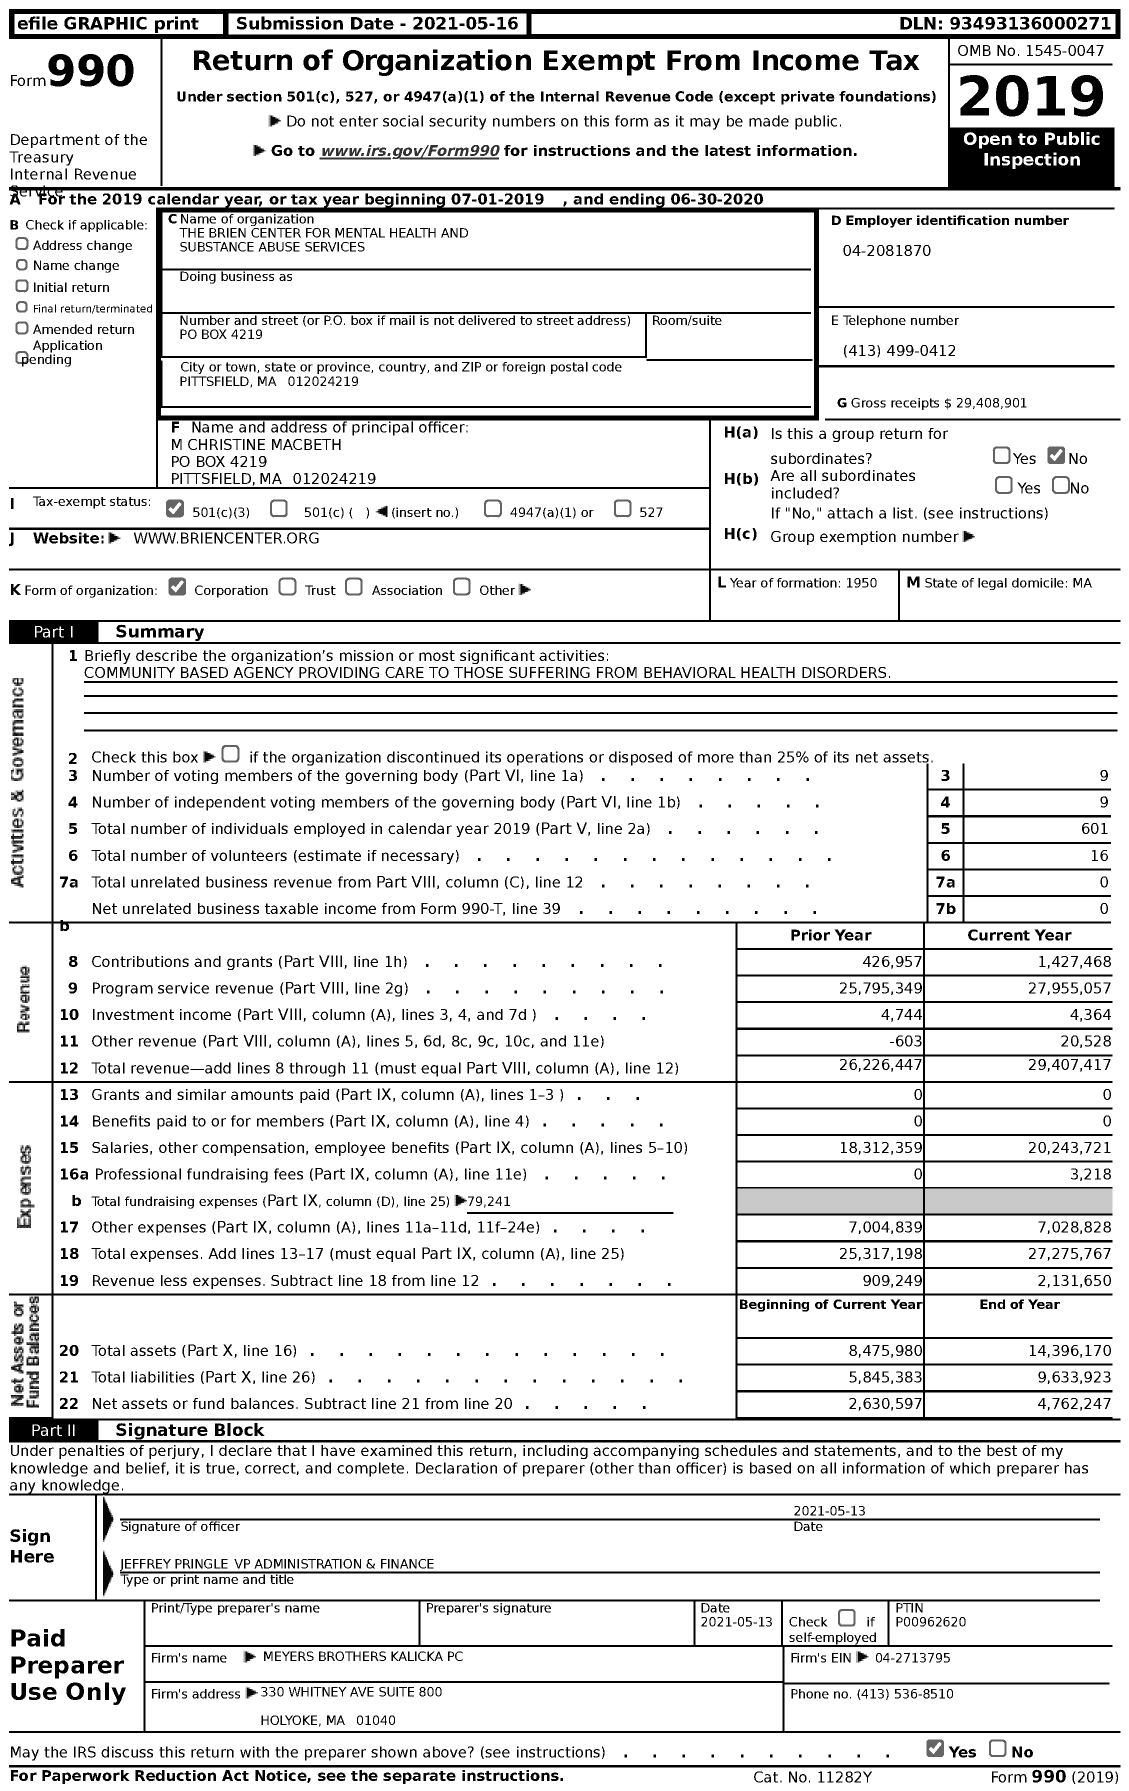 Image of first page of 2019 Form 990 for The Brien Center for Mental Health and Substance Abuse Services